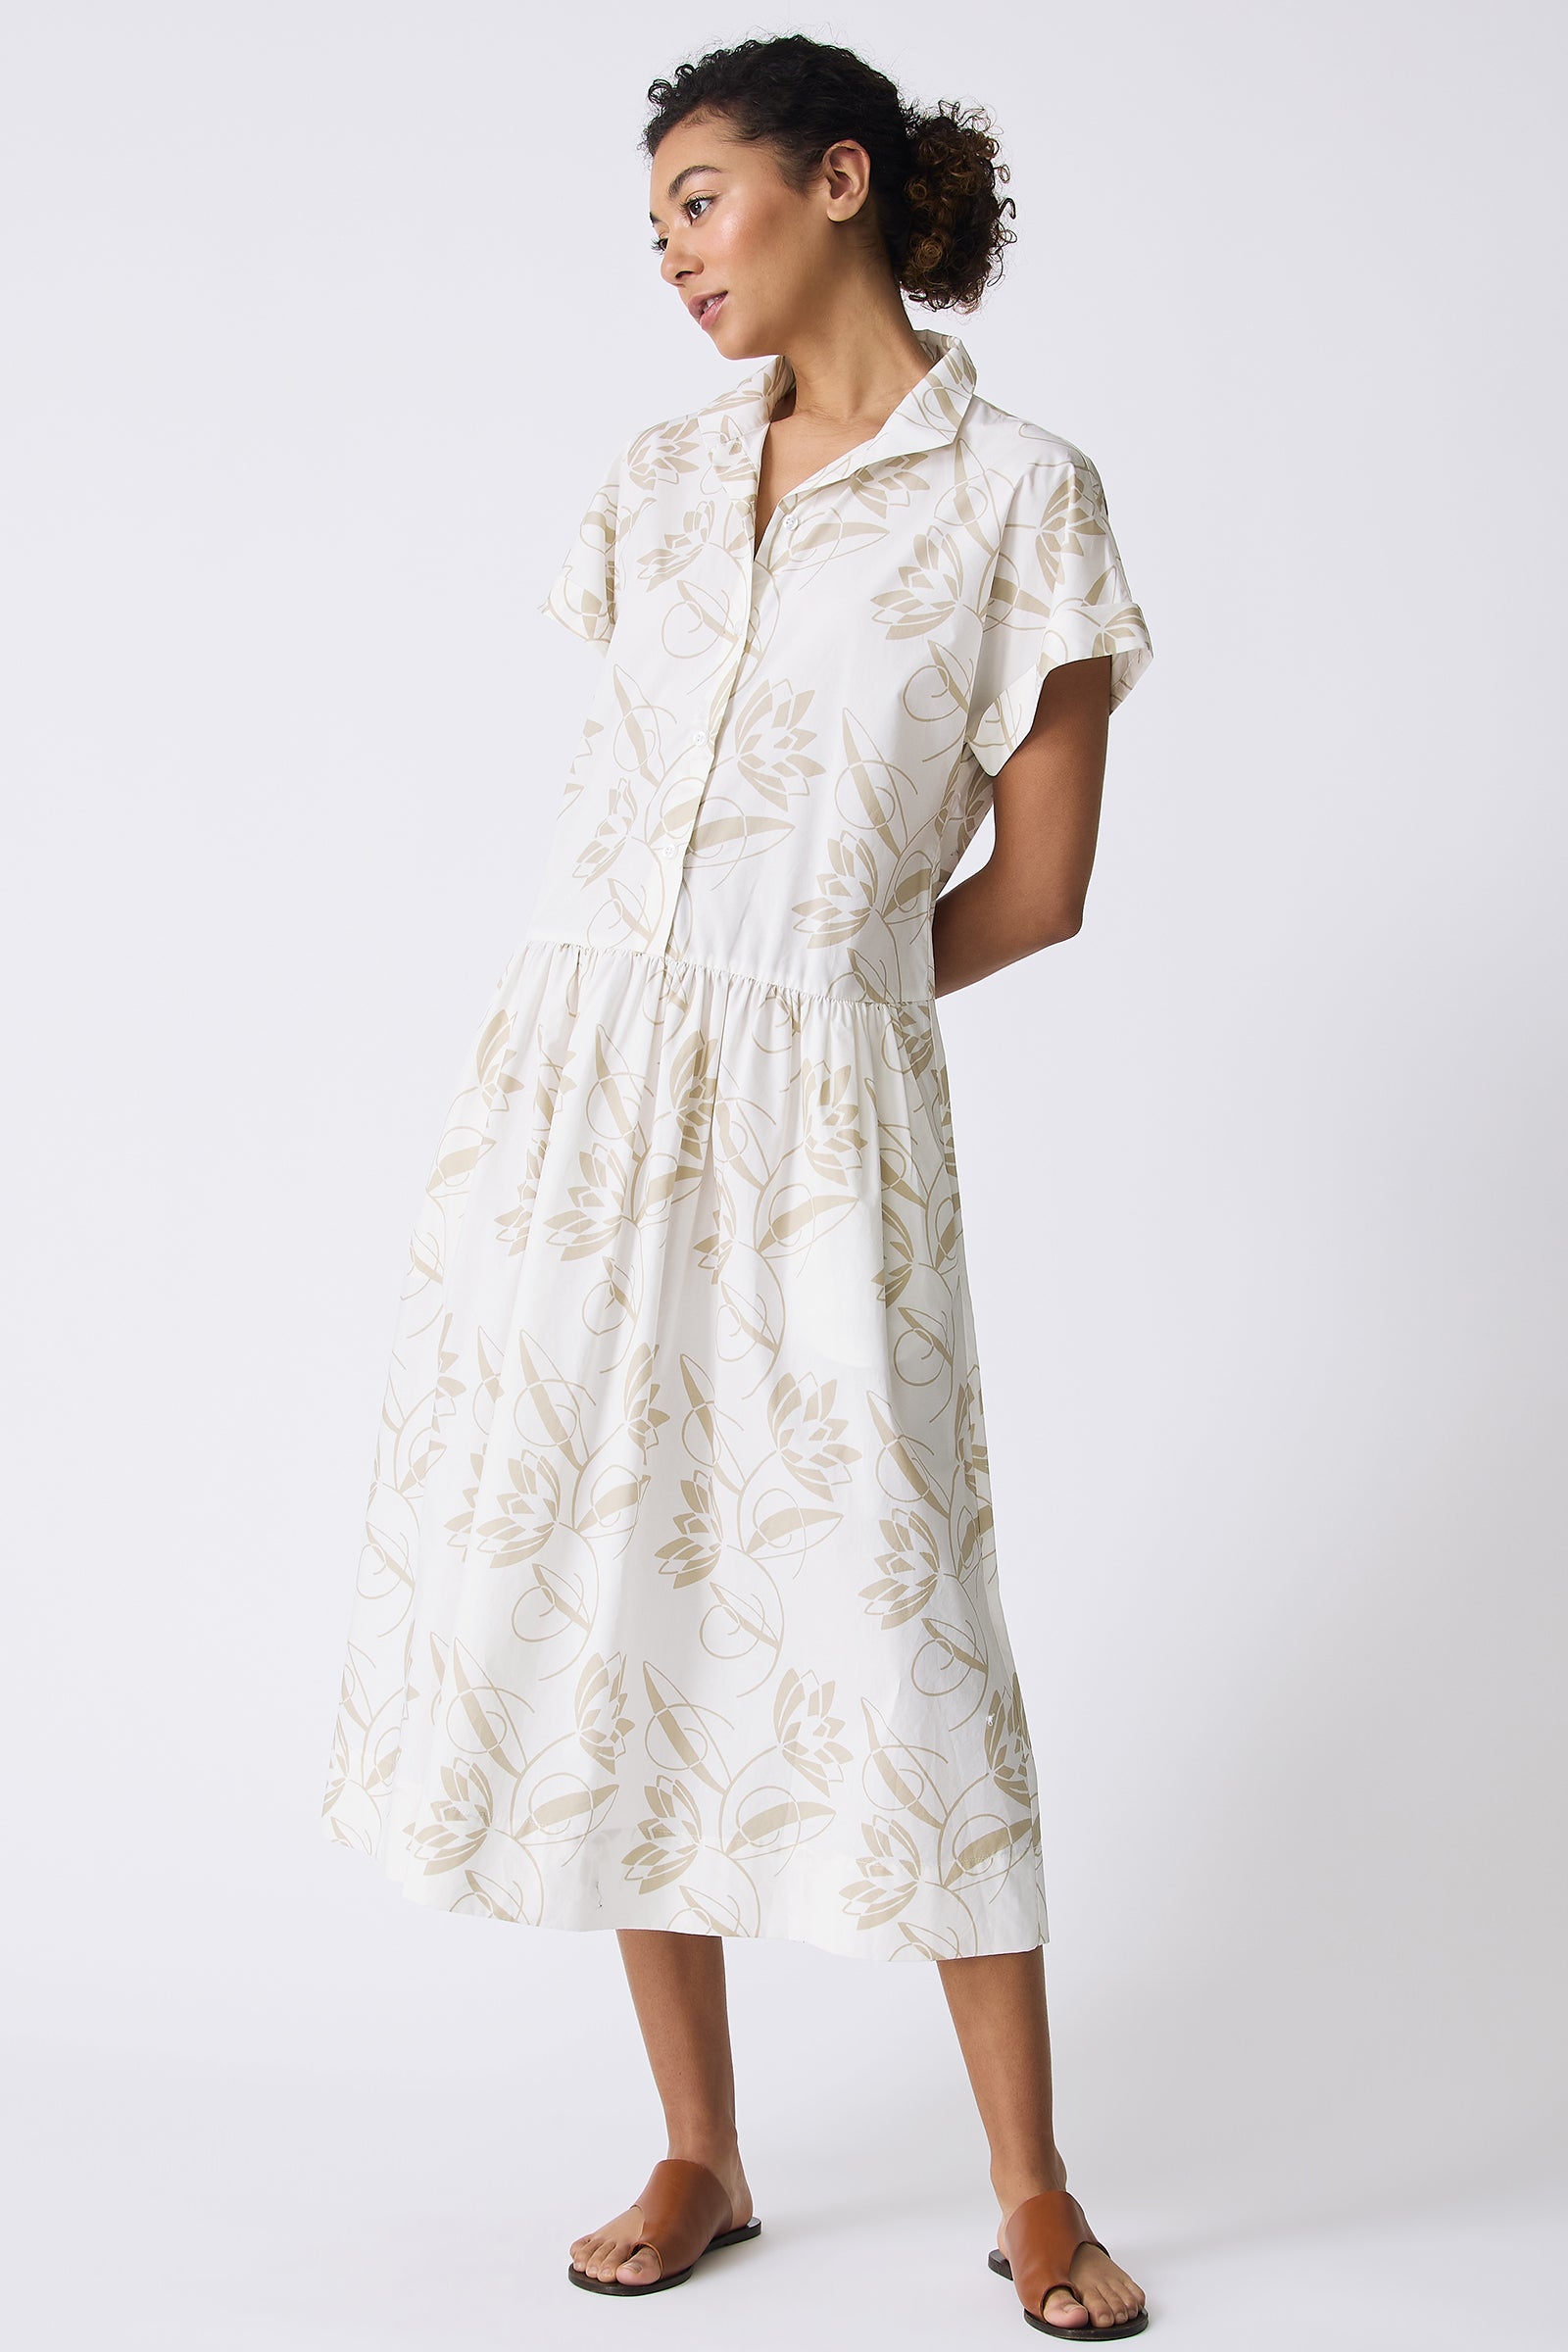 Kal Rieman Tanya Shirt Dress in Lotus Print on model with hands behind back full front view